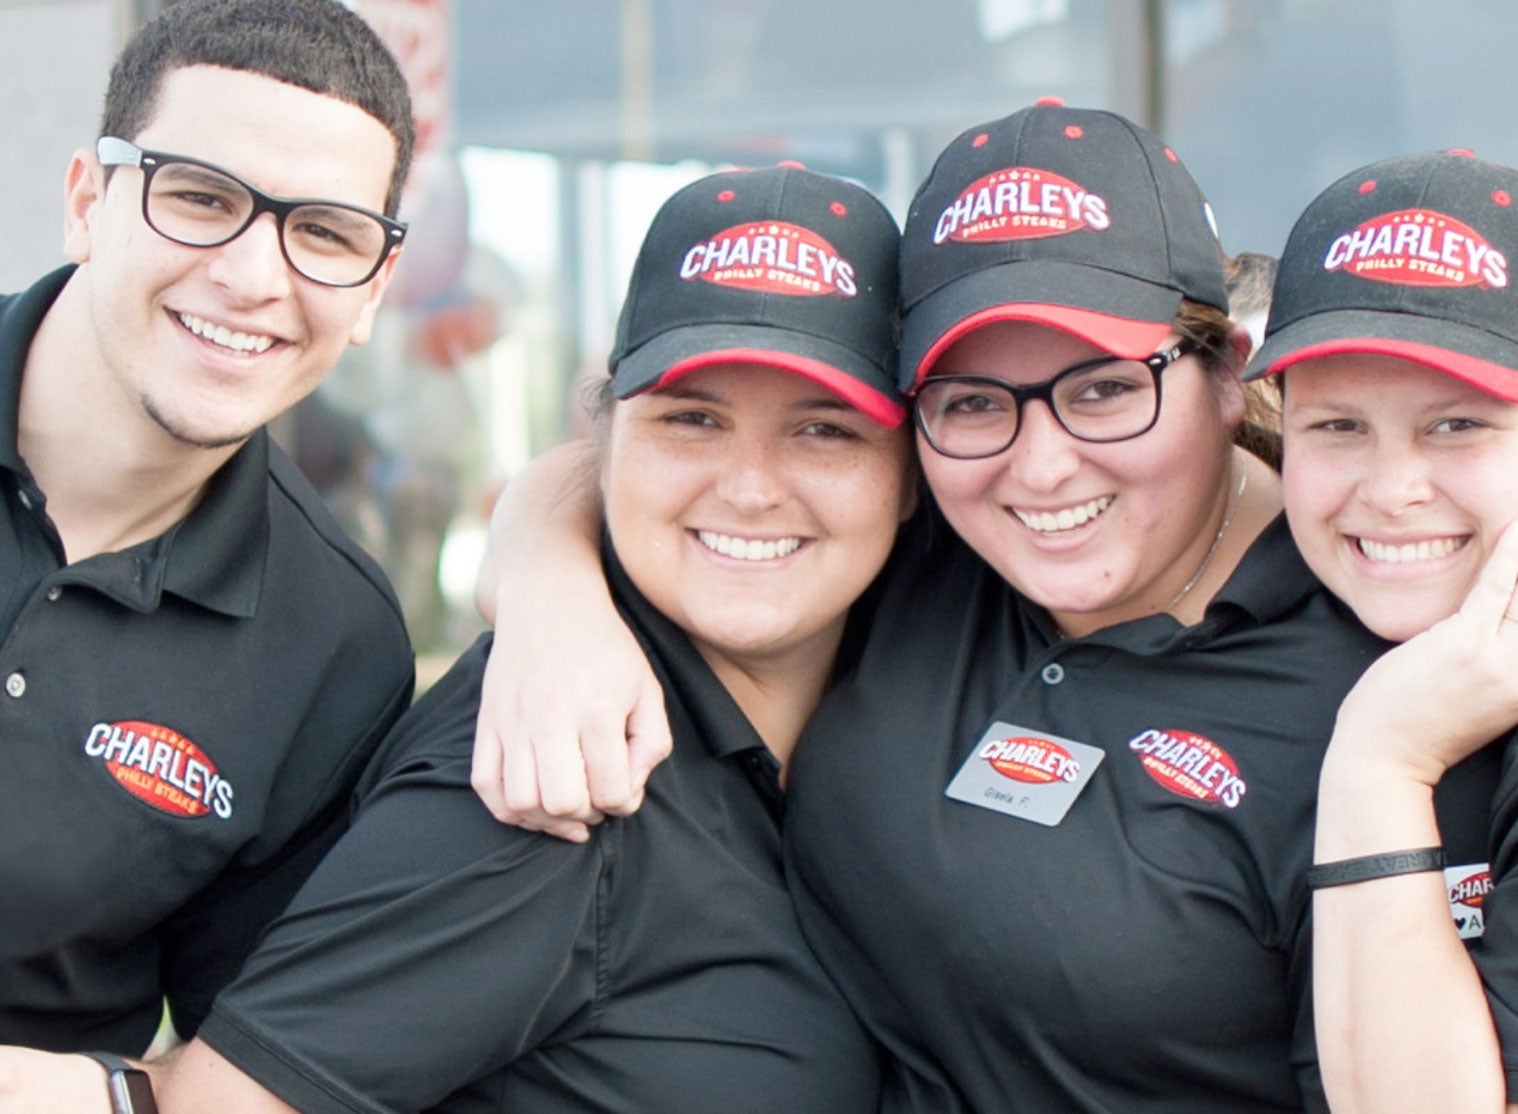 Four Charleys team members smiling and laughing while wearing uniforms. Learn more about Charleys careers.